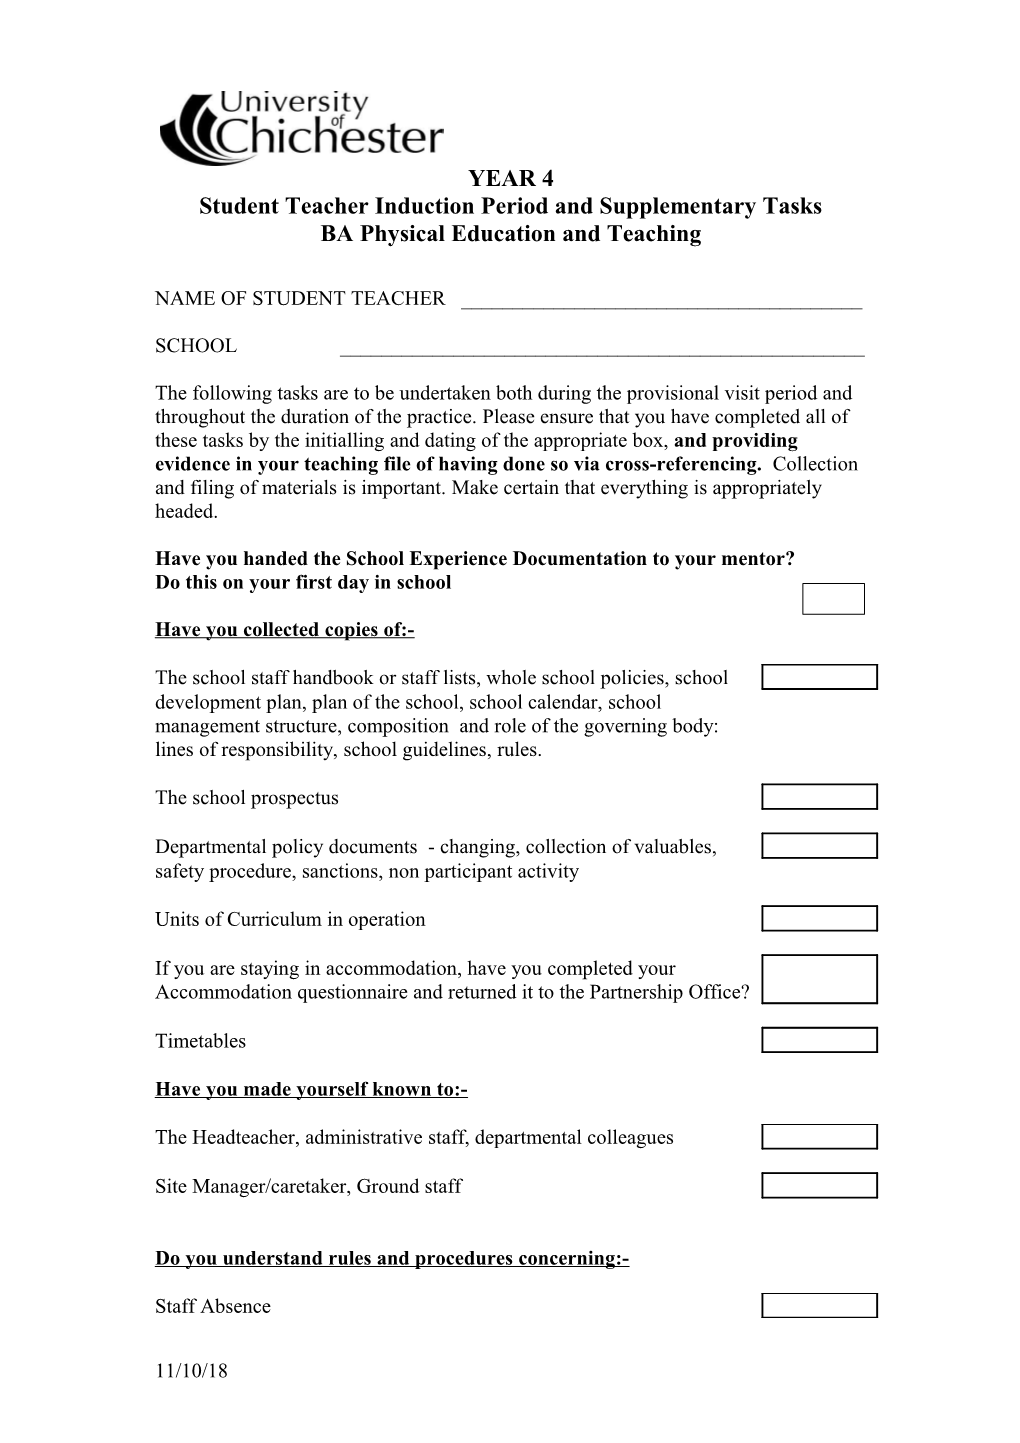 Student Teacher Induction Period and Supplementary Tasks Year 3